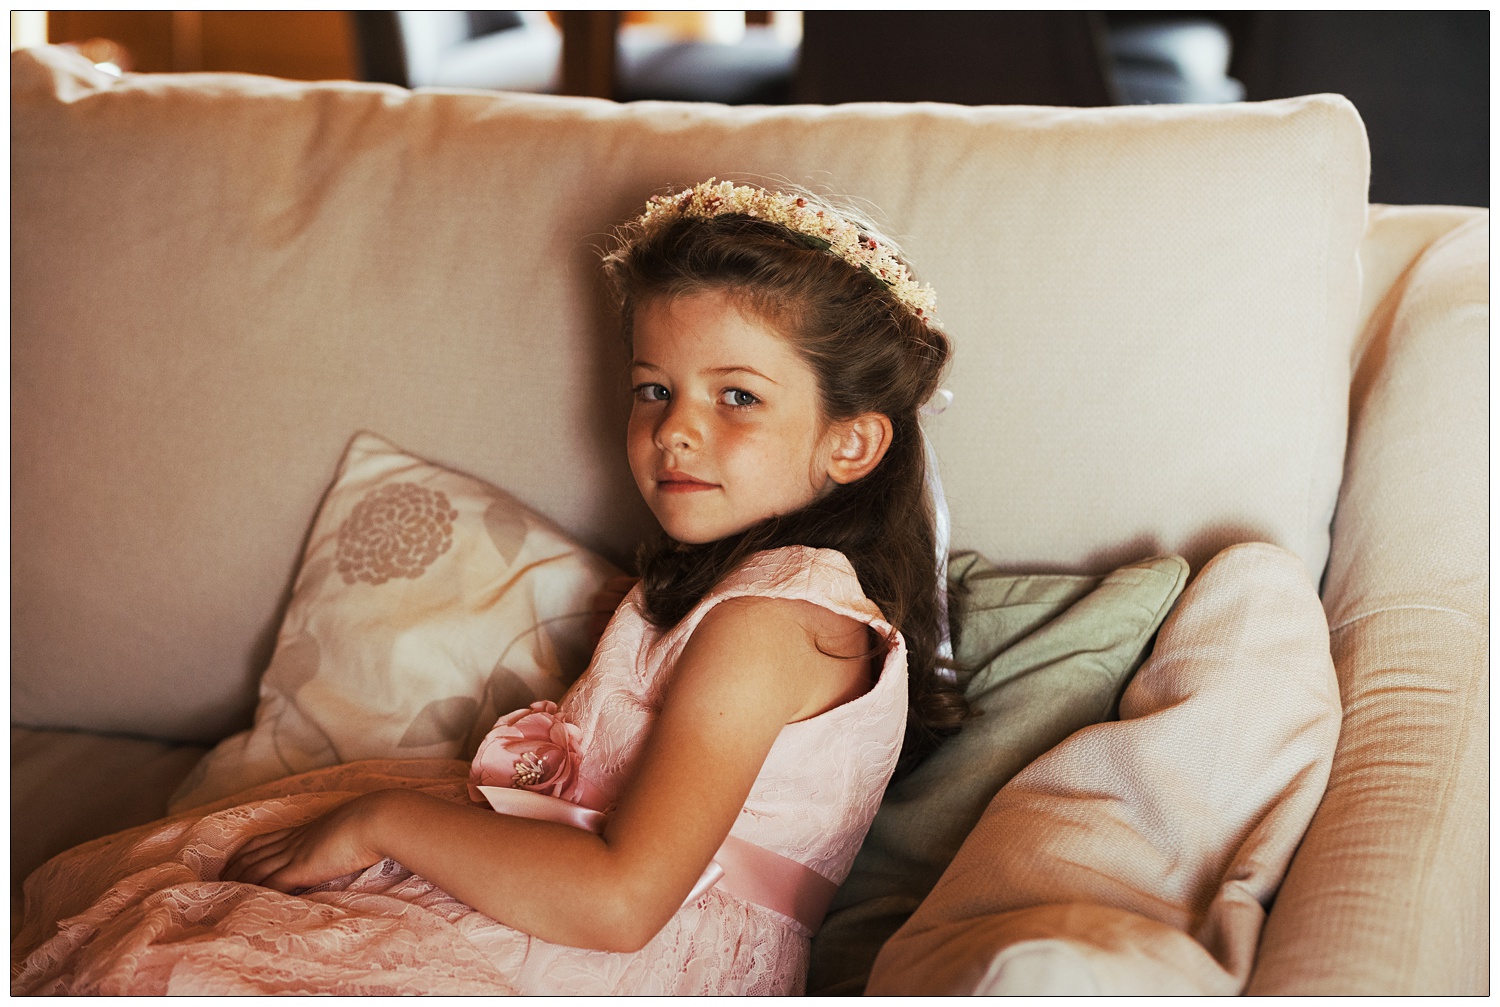 A flower girl sits on a sofa and looks at the camera. She is wearing a pink dress.